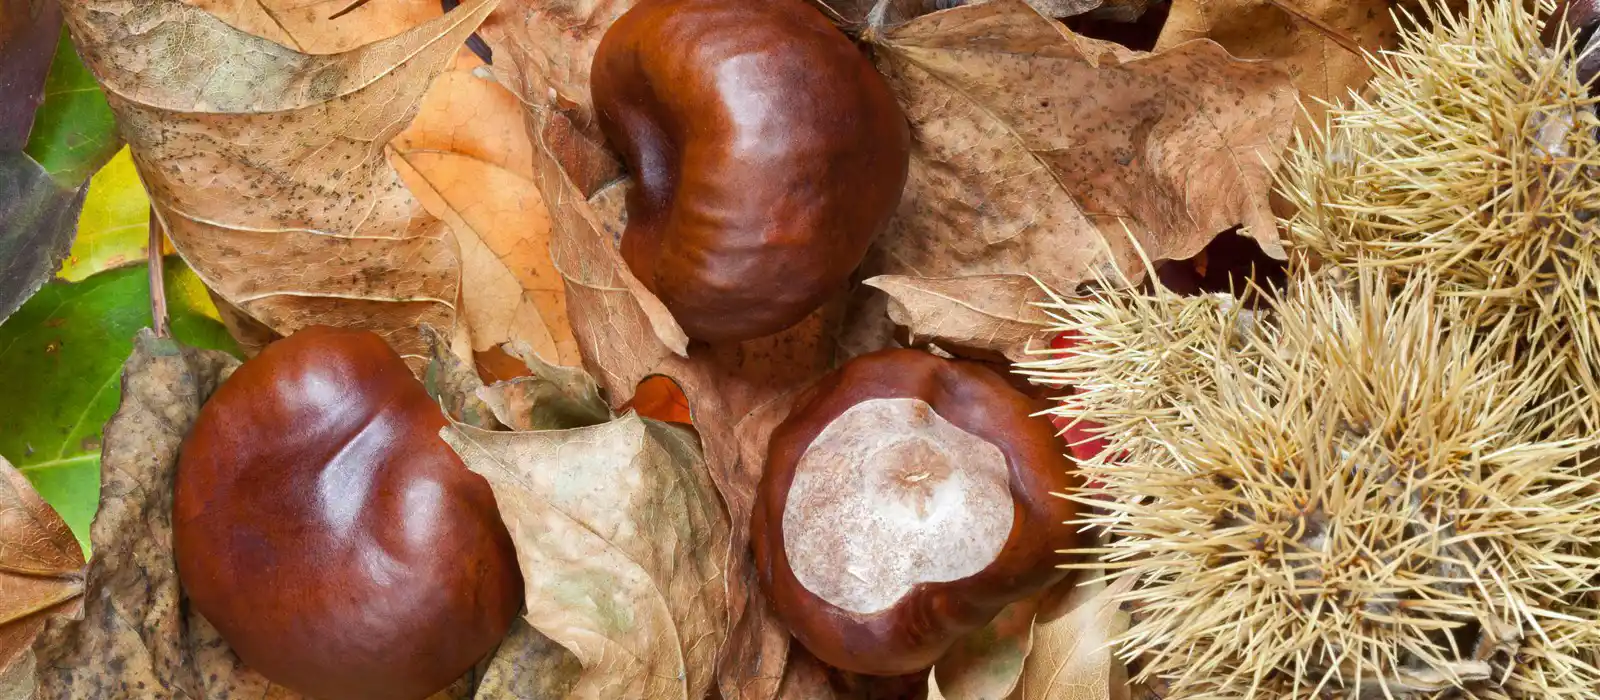 Conkers can be collected in autumn to play the conkers game